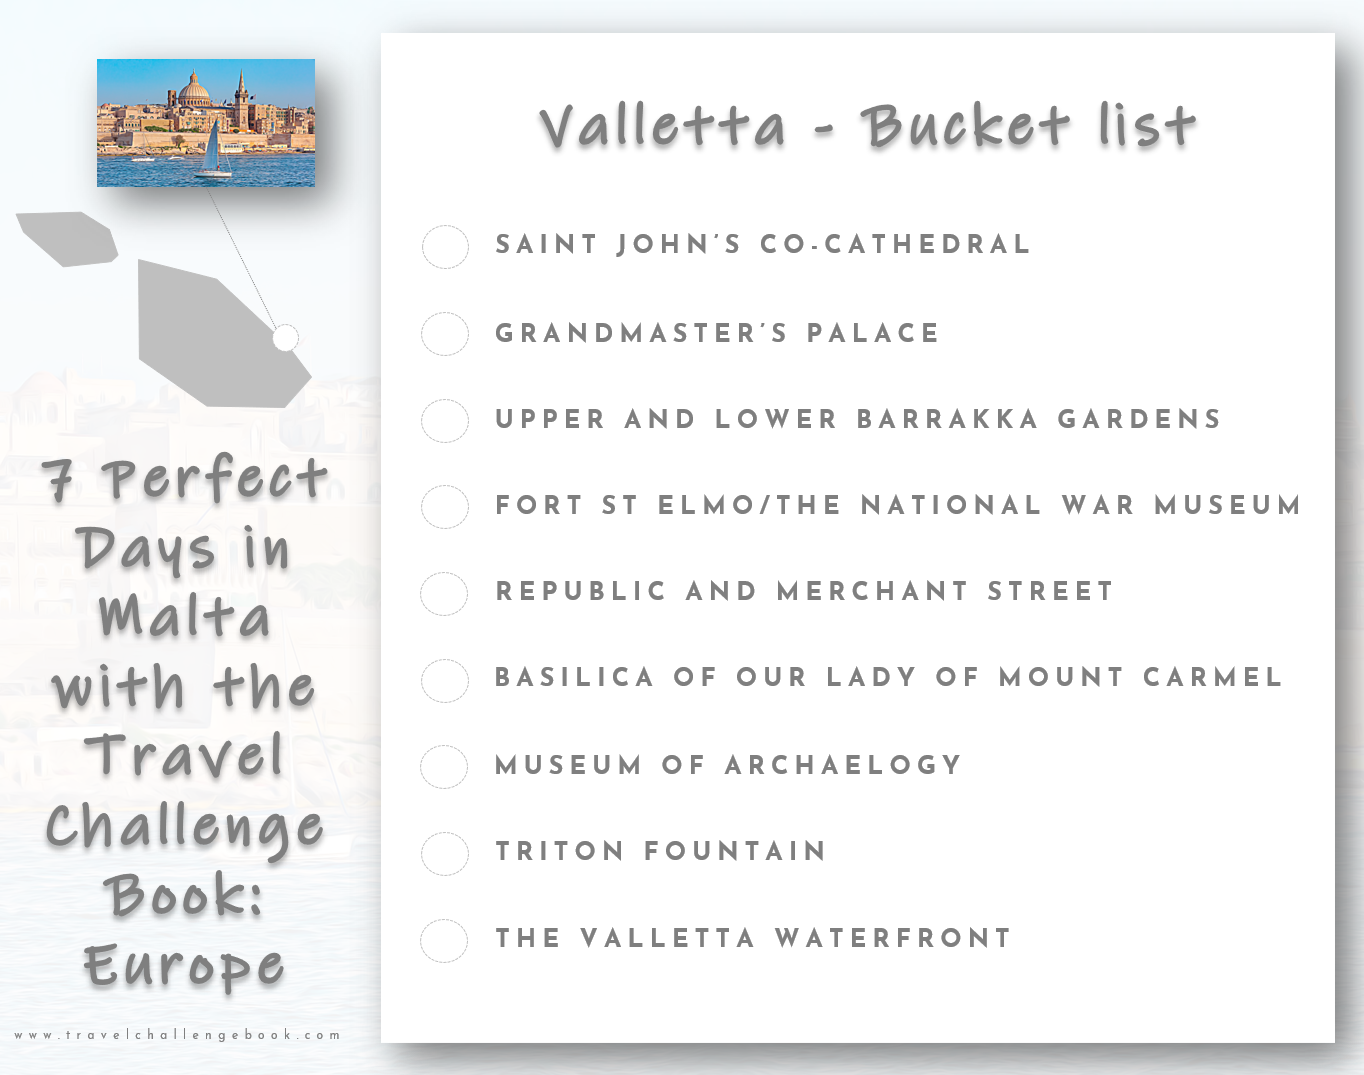 One day in Valletta - best places to see